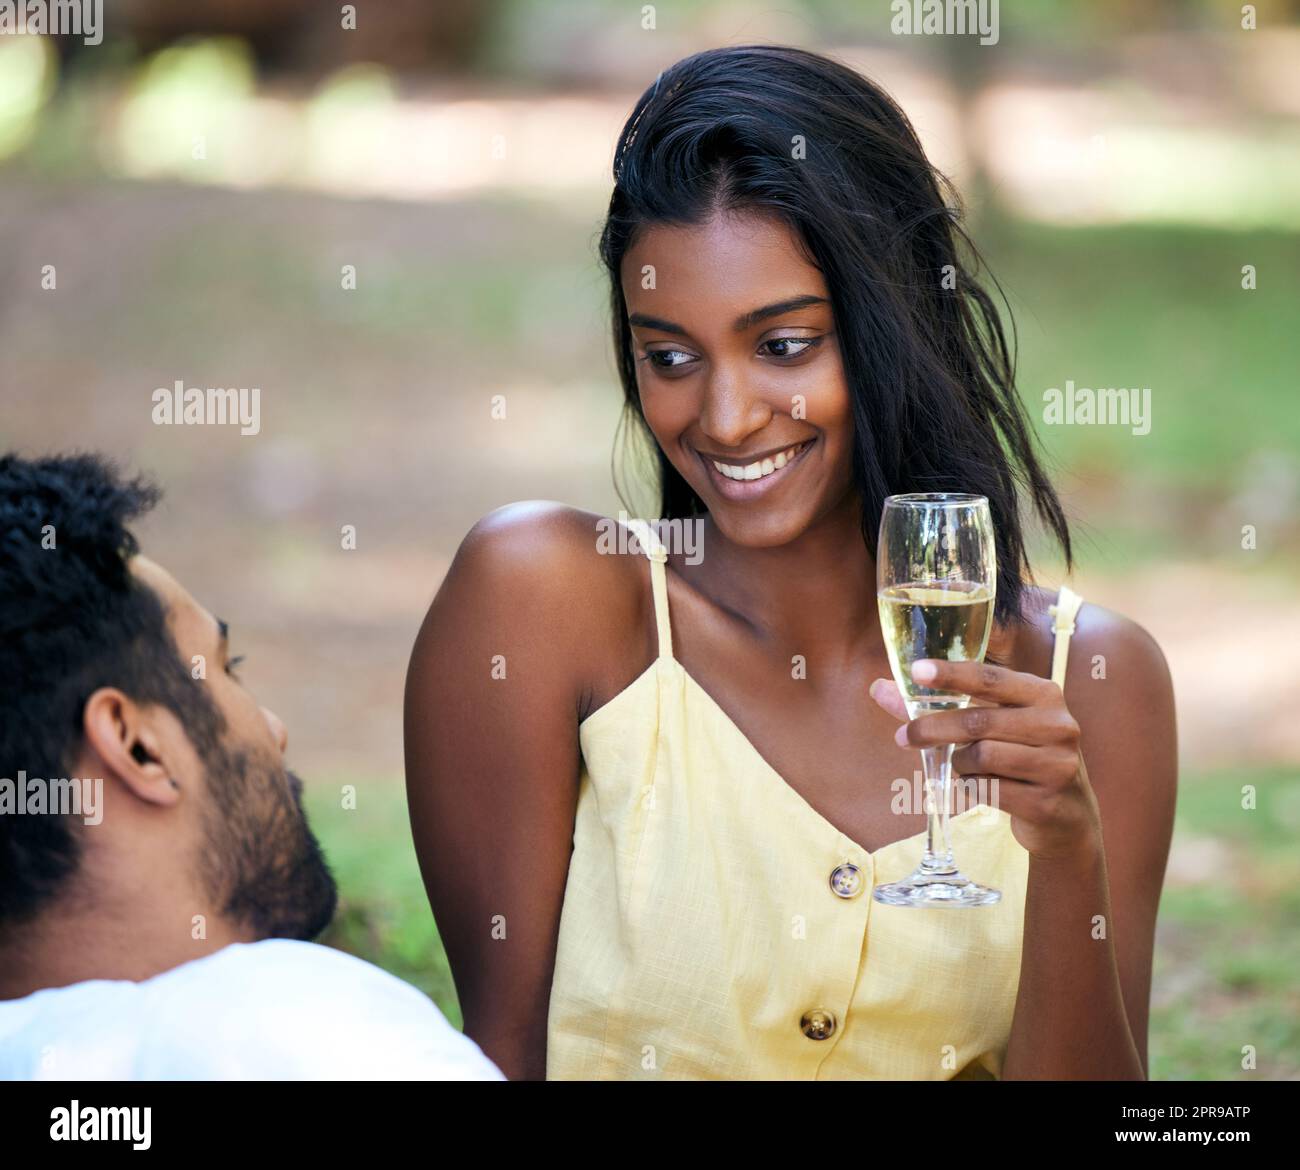 He knows just how to make me feel good. a young woman drinking champagne while on a date at the park. Stock Photo